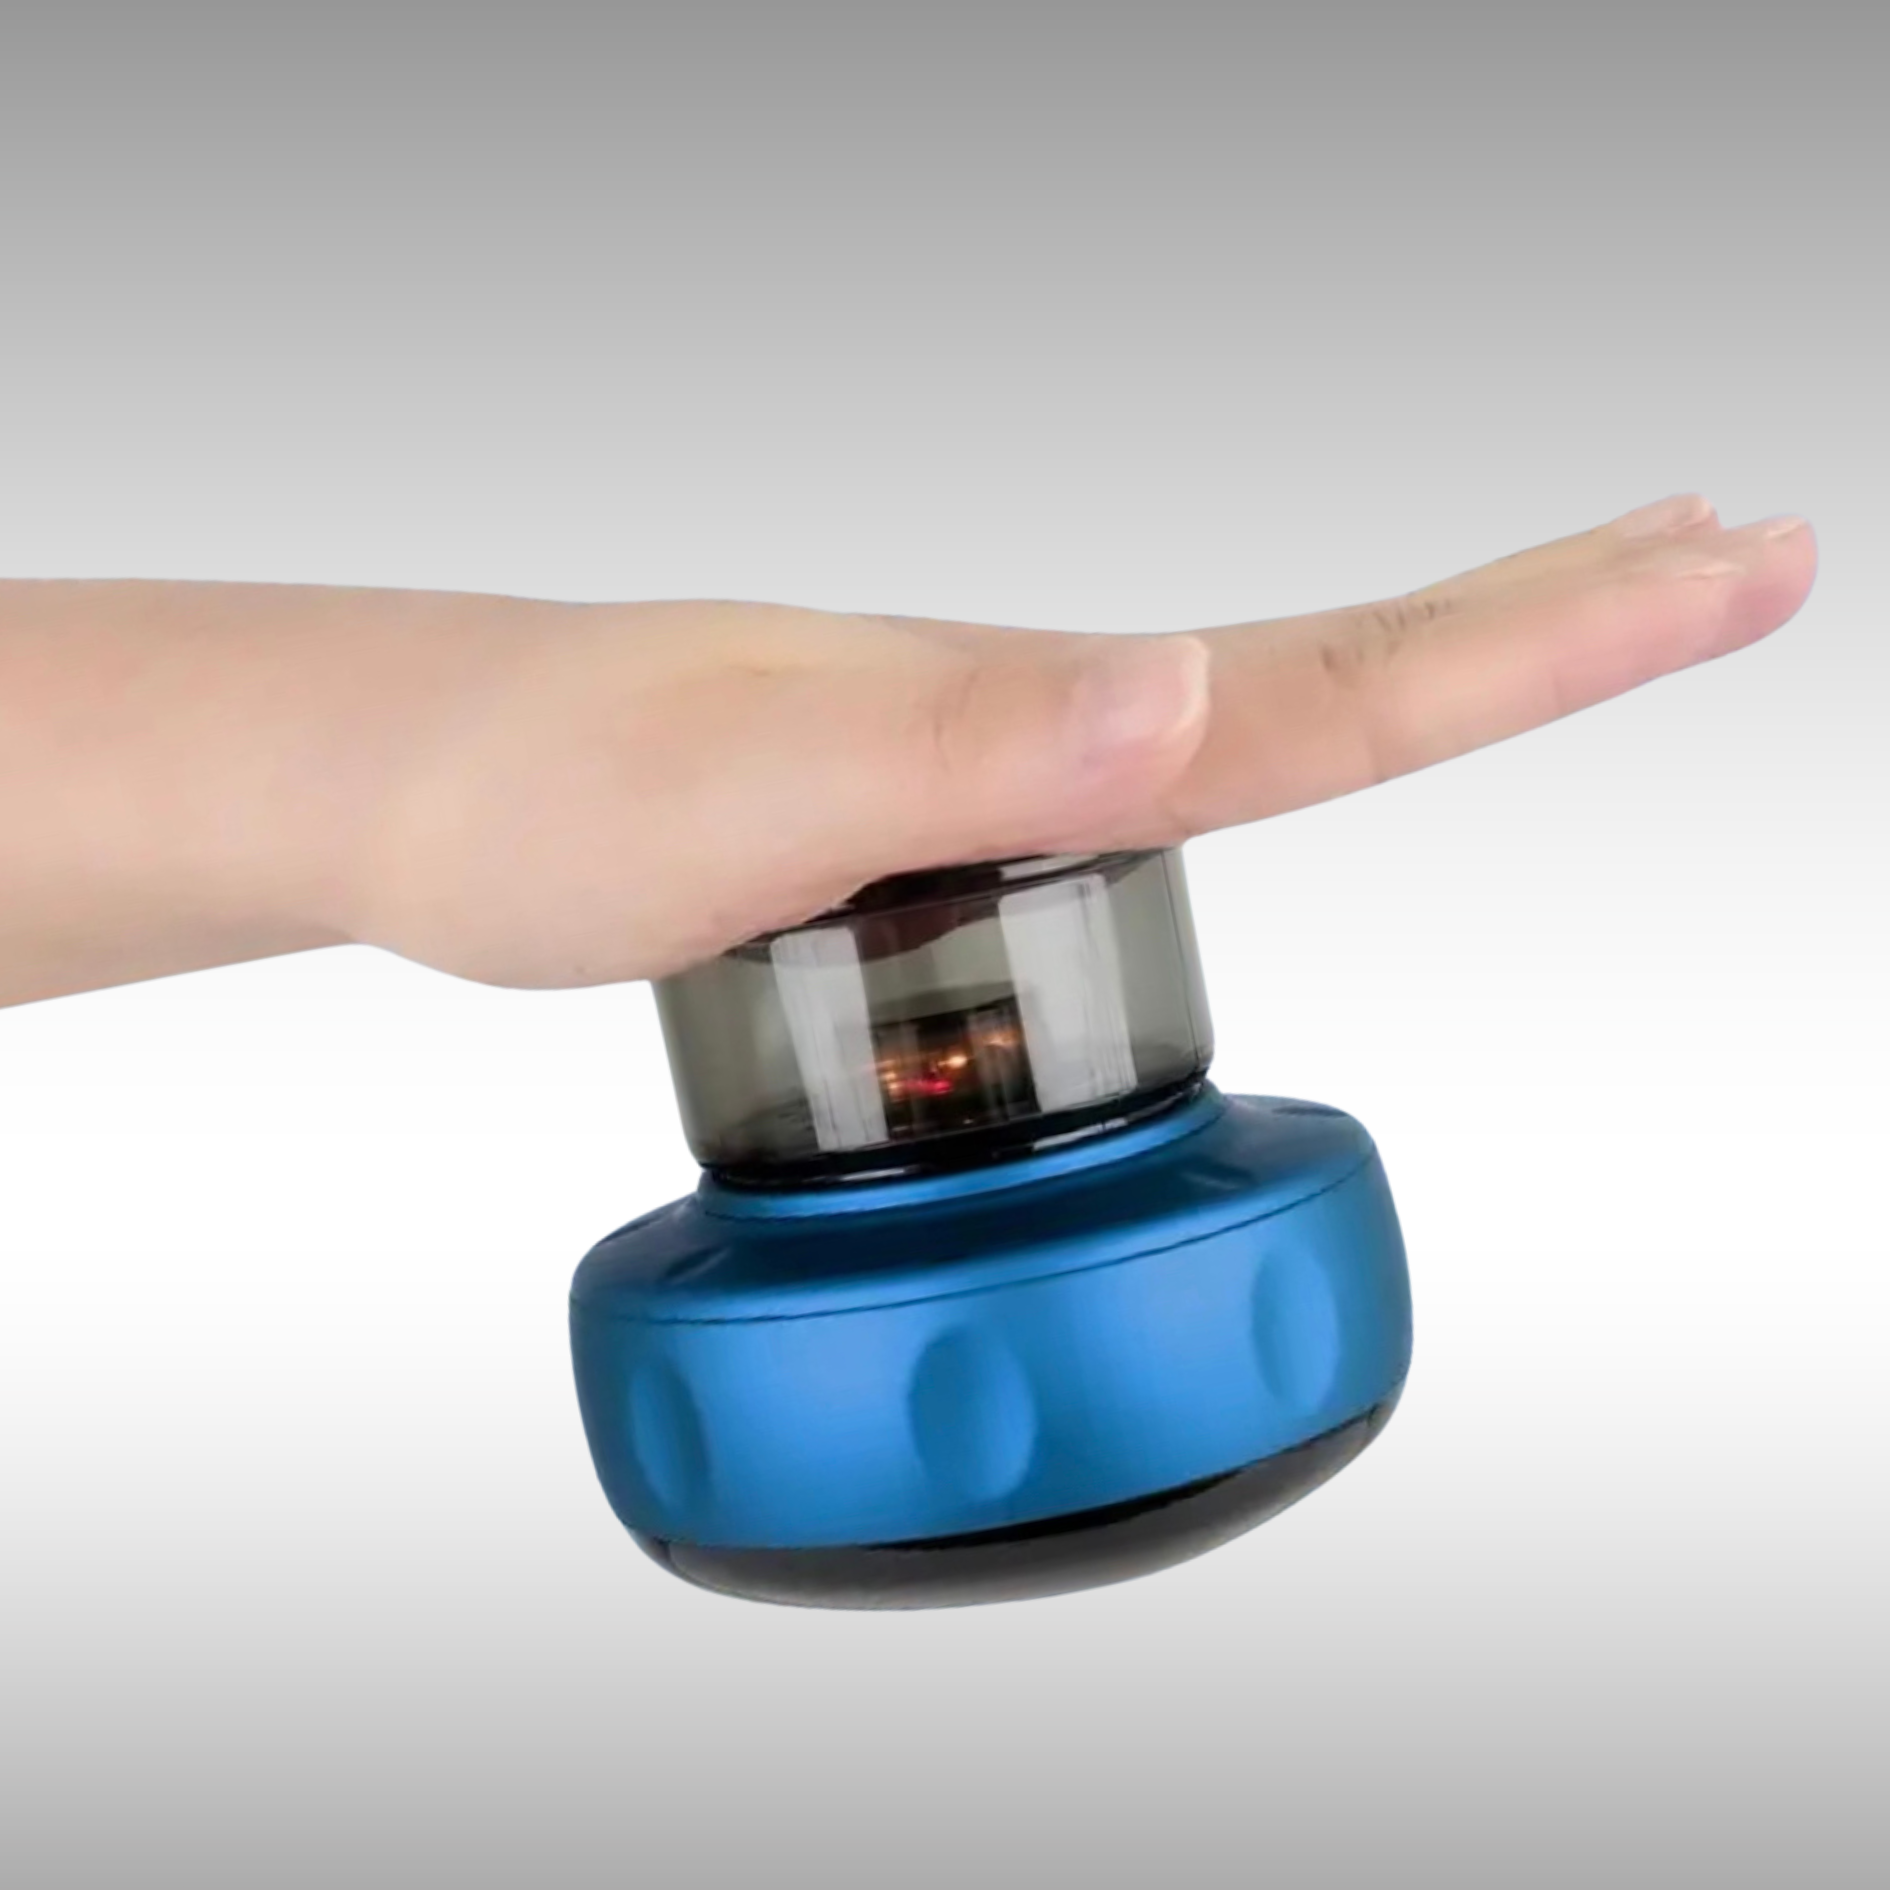 Image of NuLYFF™ Intelligent Cupper showing off its powerful patented dynamic suction technology as it hangs upside down suctioned to a palm of a hand. this cupping therapy device has redlight shining onto the hand.